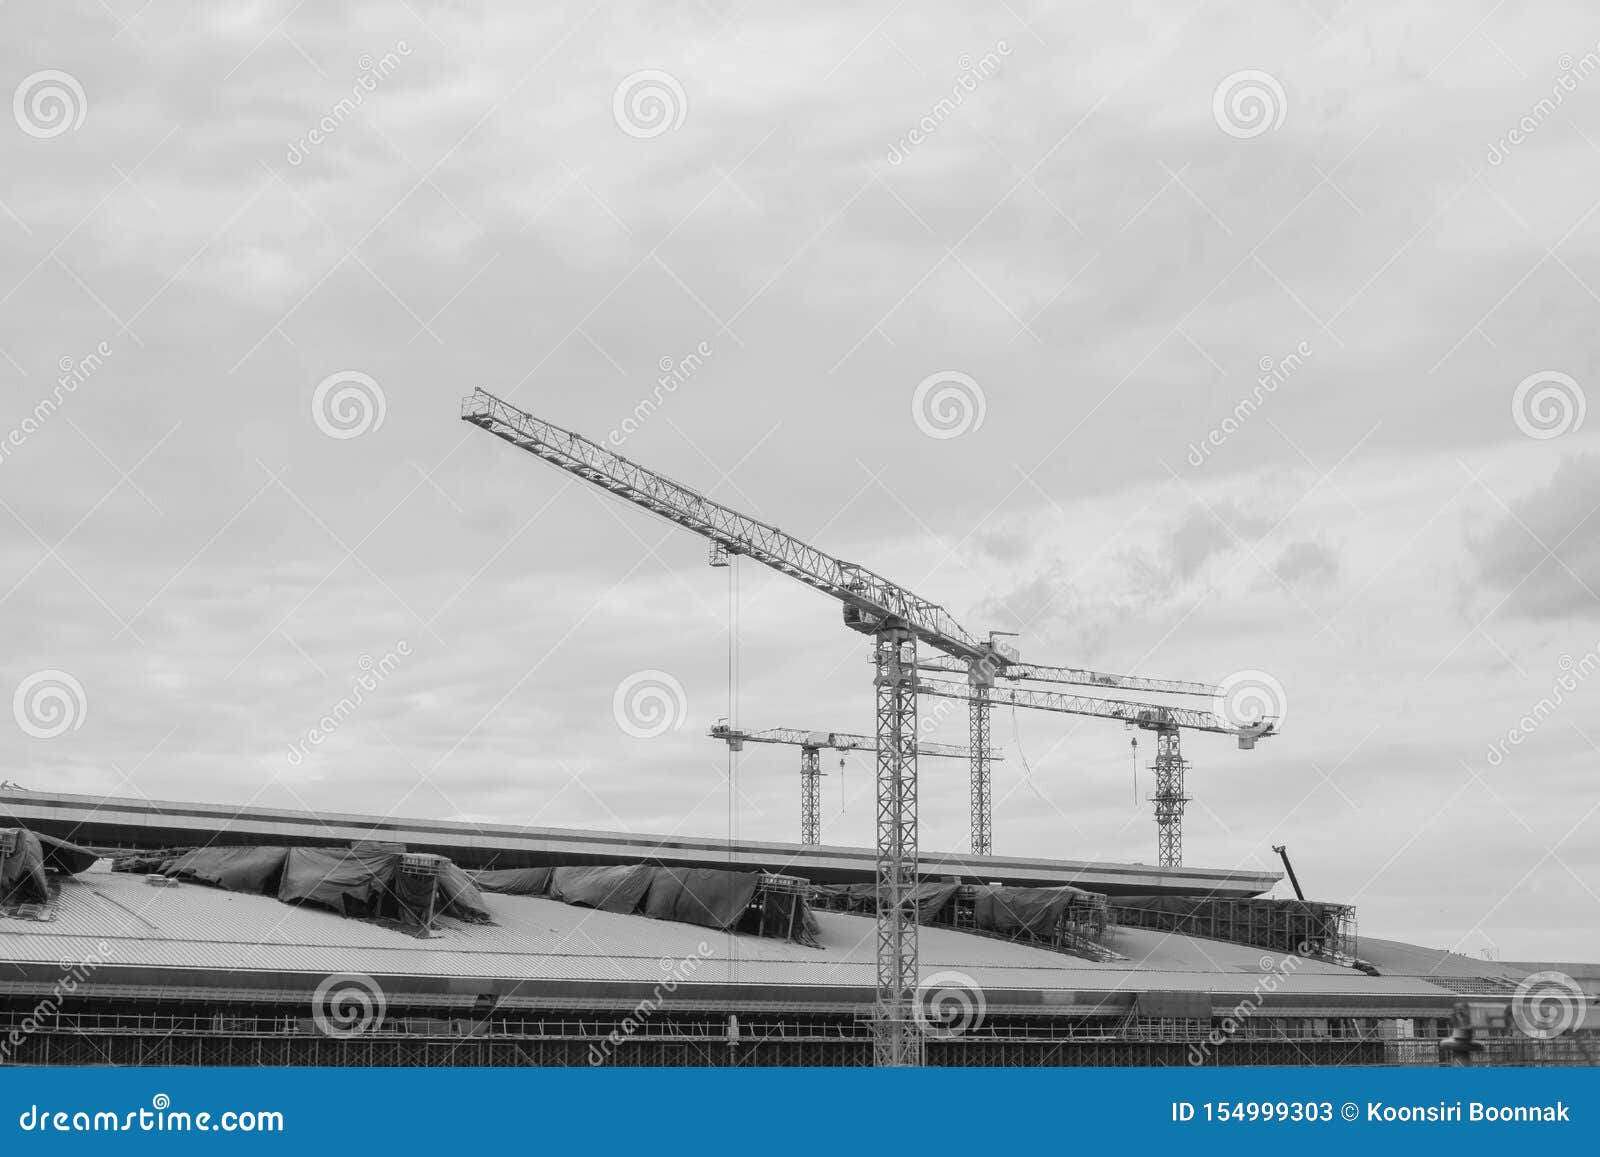 Black and Whiteimage of Scaffolding in the High Altitude, Scaffolding ...